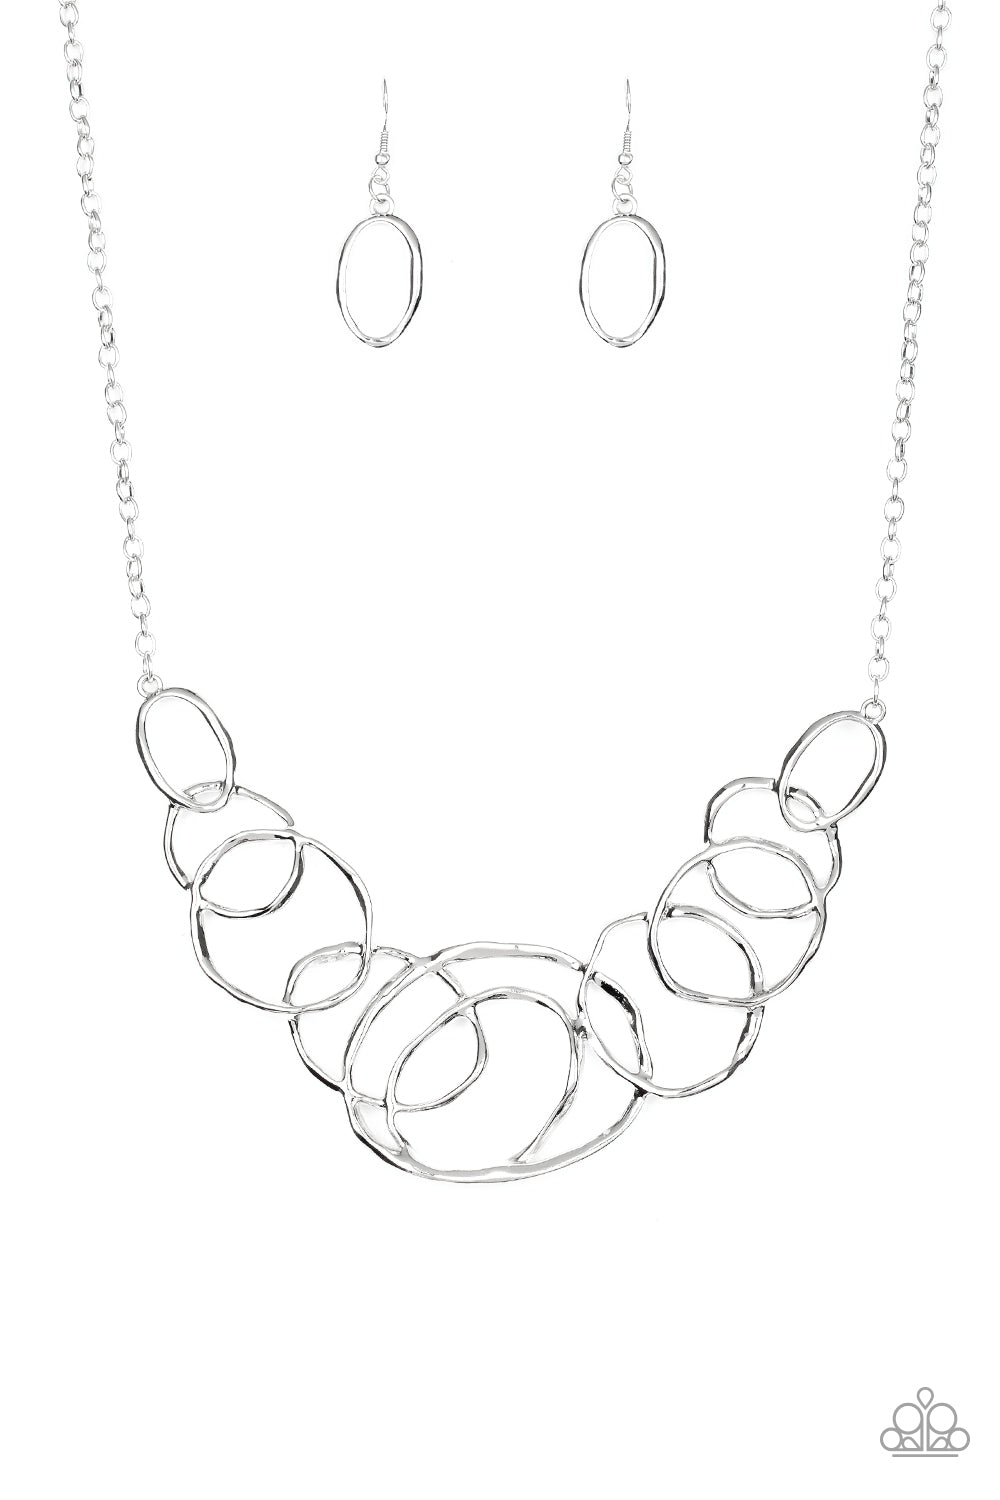 All Around Radiance - silver - Paparazzi necklace